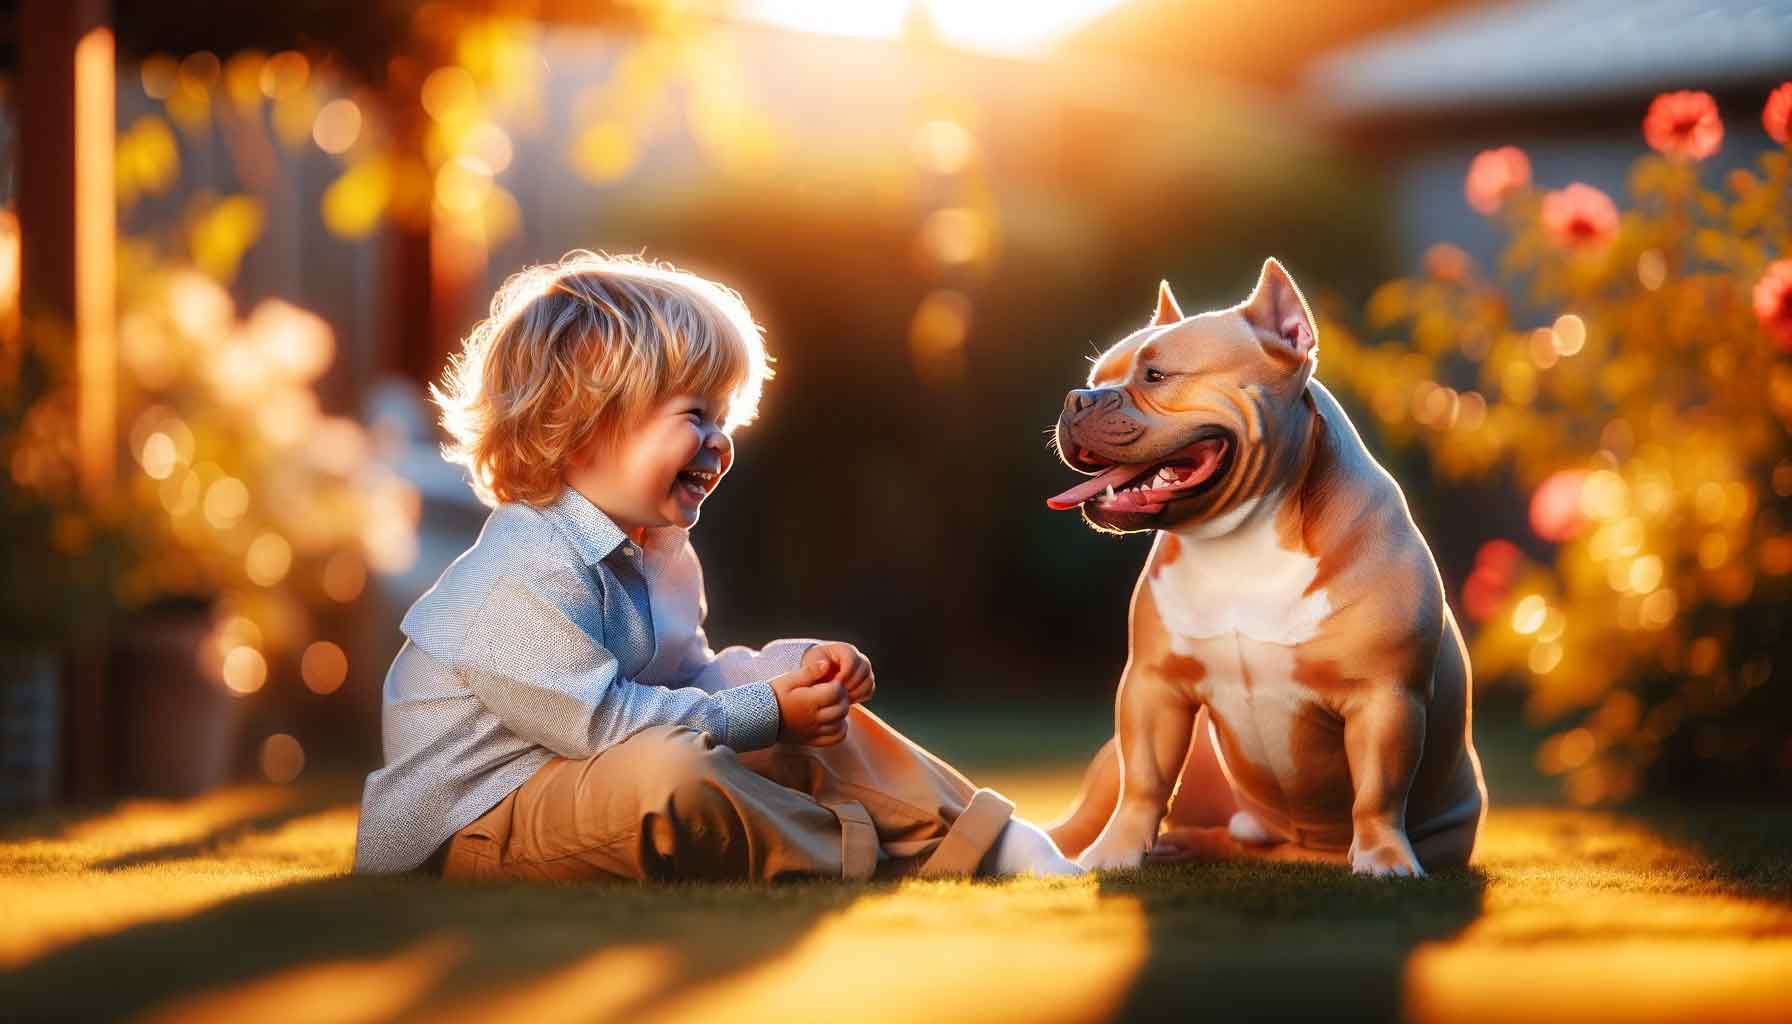 Champagne Micro Bully showing gentle behavior with a laughing child in a sunny backyard.